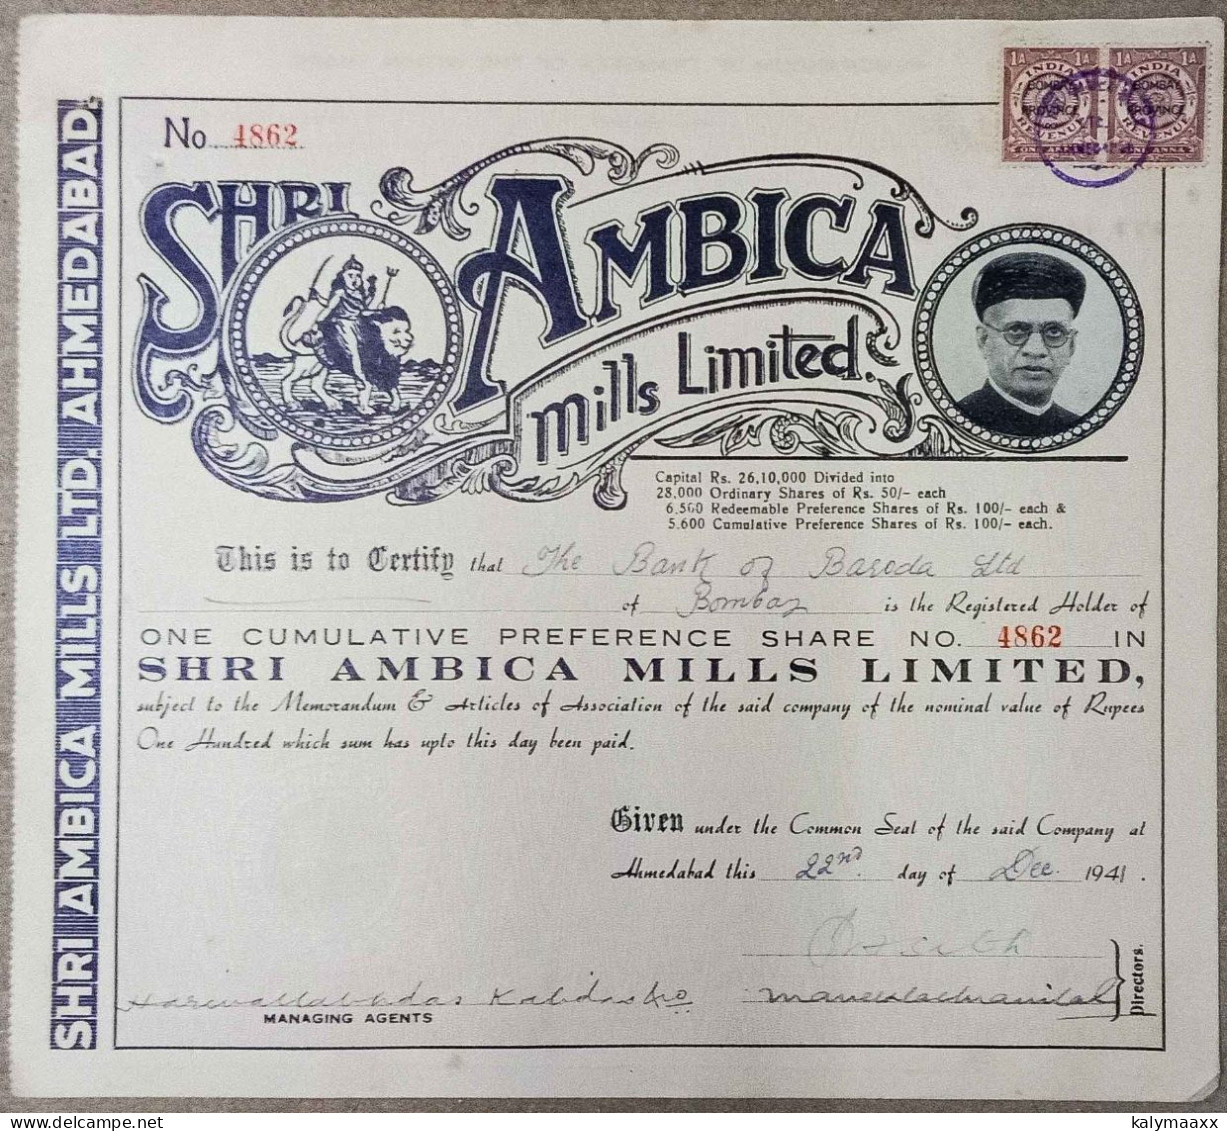 INDIA 1941 SHRI AMBICA MILLS LIMITED, TEXTILE, SPINNING, WEAVING.....SHARE CERTIFICATE - Textile